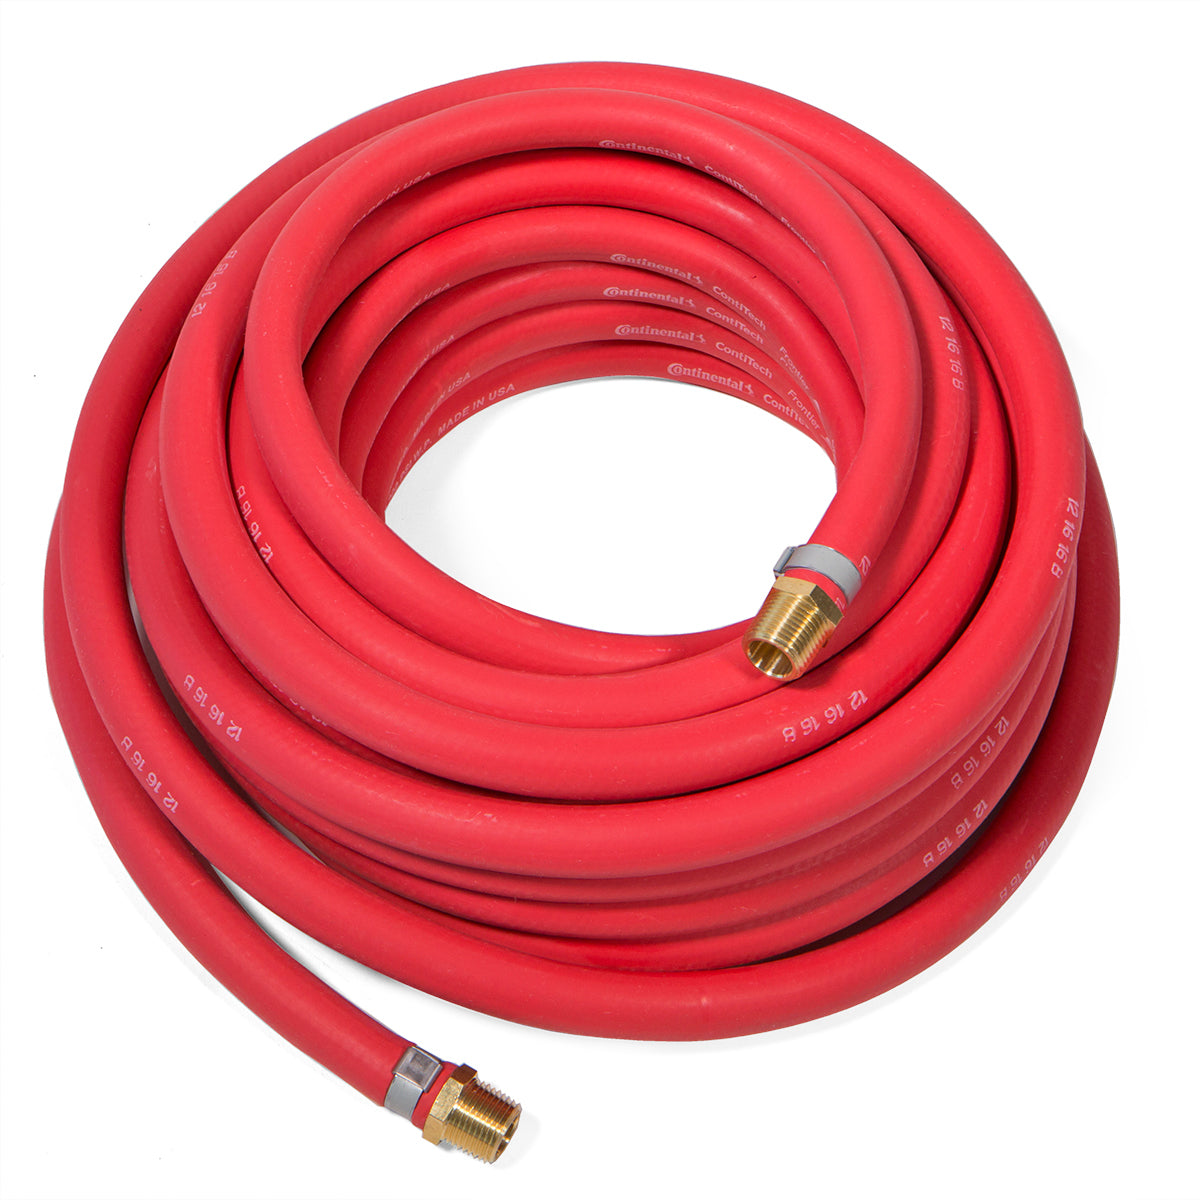 All-Weather Durable Air Hose 1/2 x 50' ft Pneumatic Compressor Rubber –  XtremepowerUS